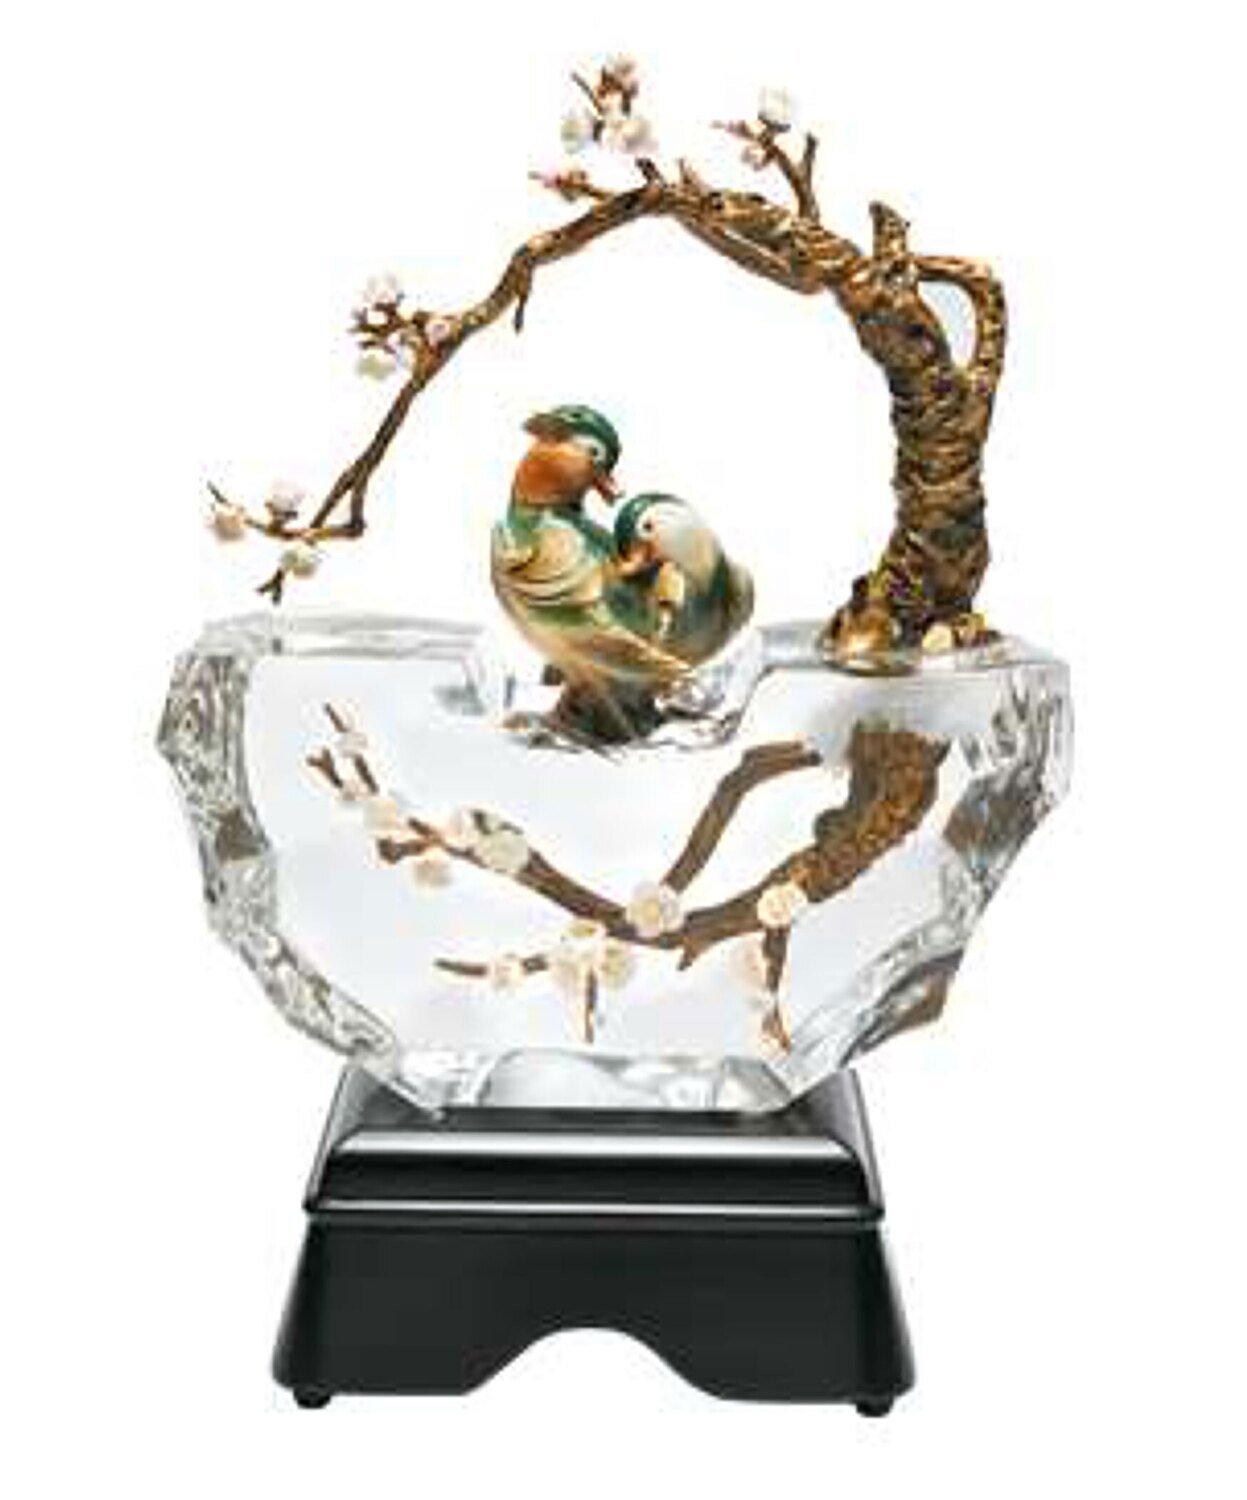 Franz Porcelain Lucite Two Birds and Tree Figurine with Wooden Base Limited Editon of 199 FL00065